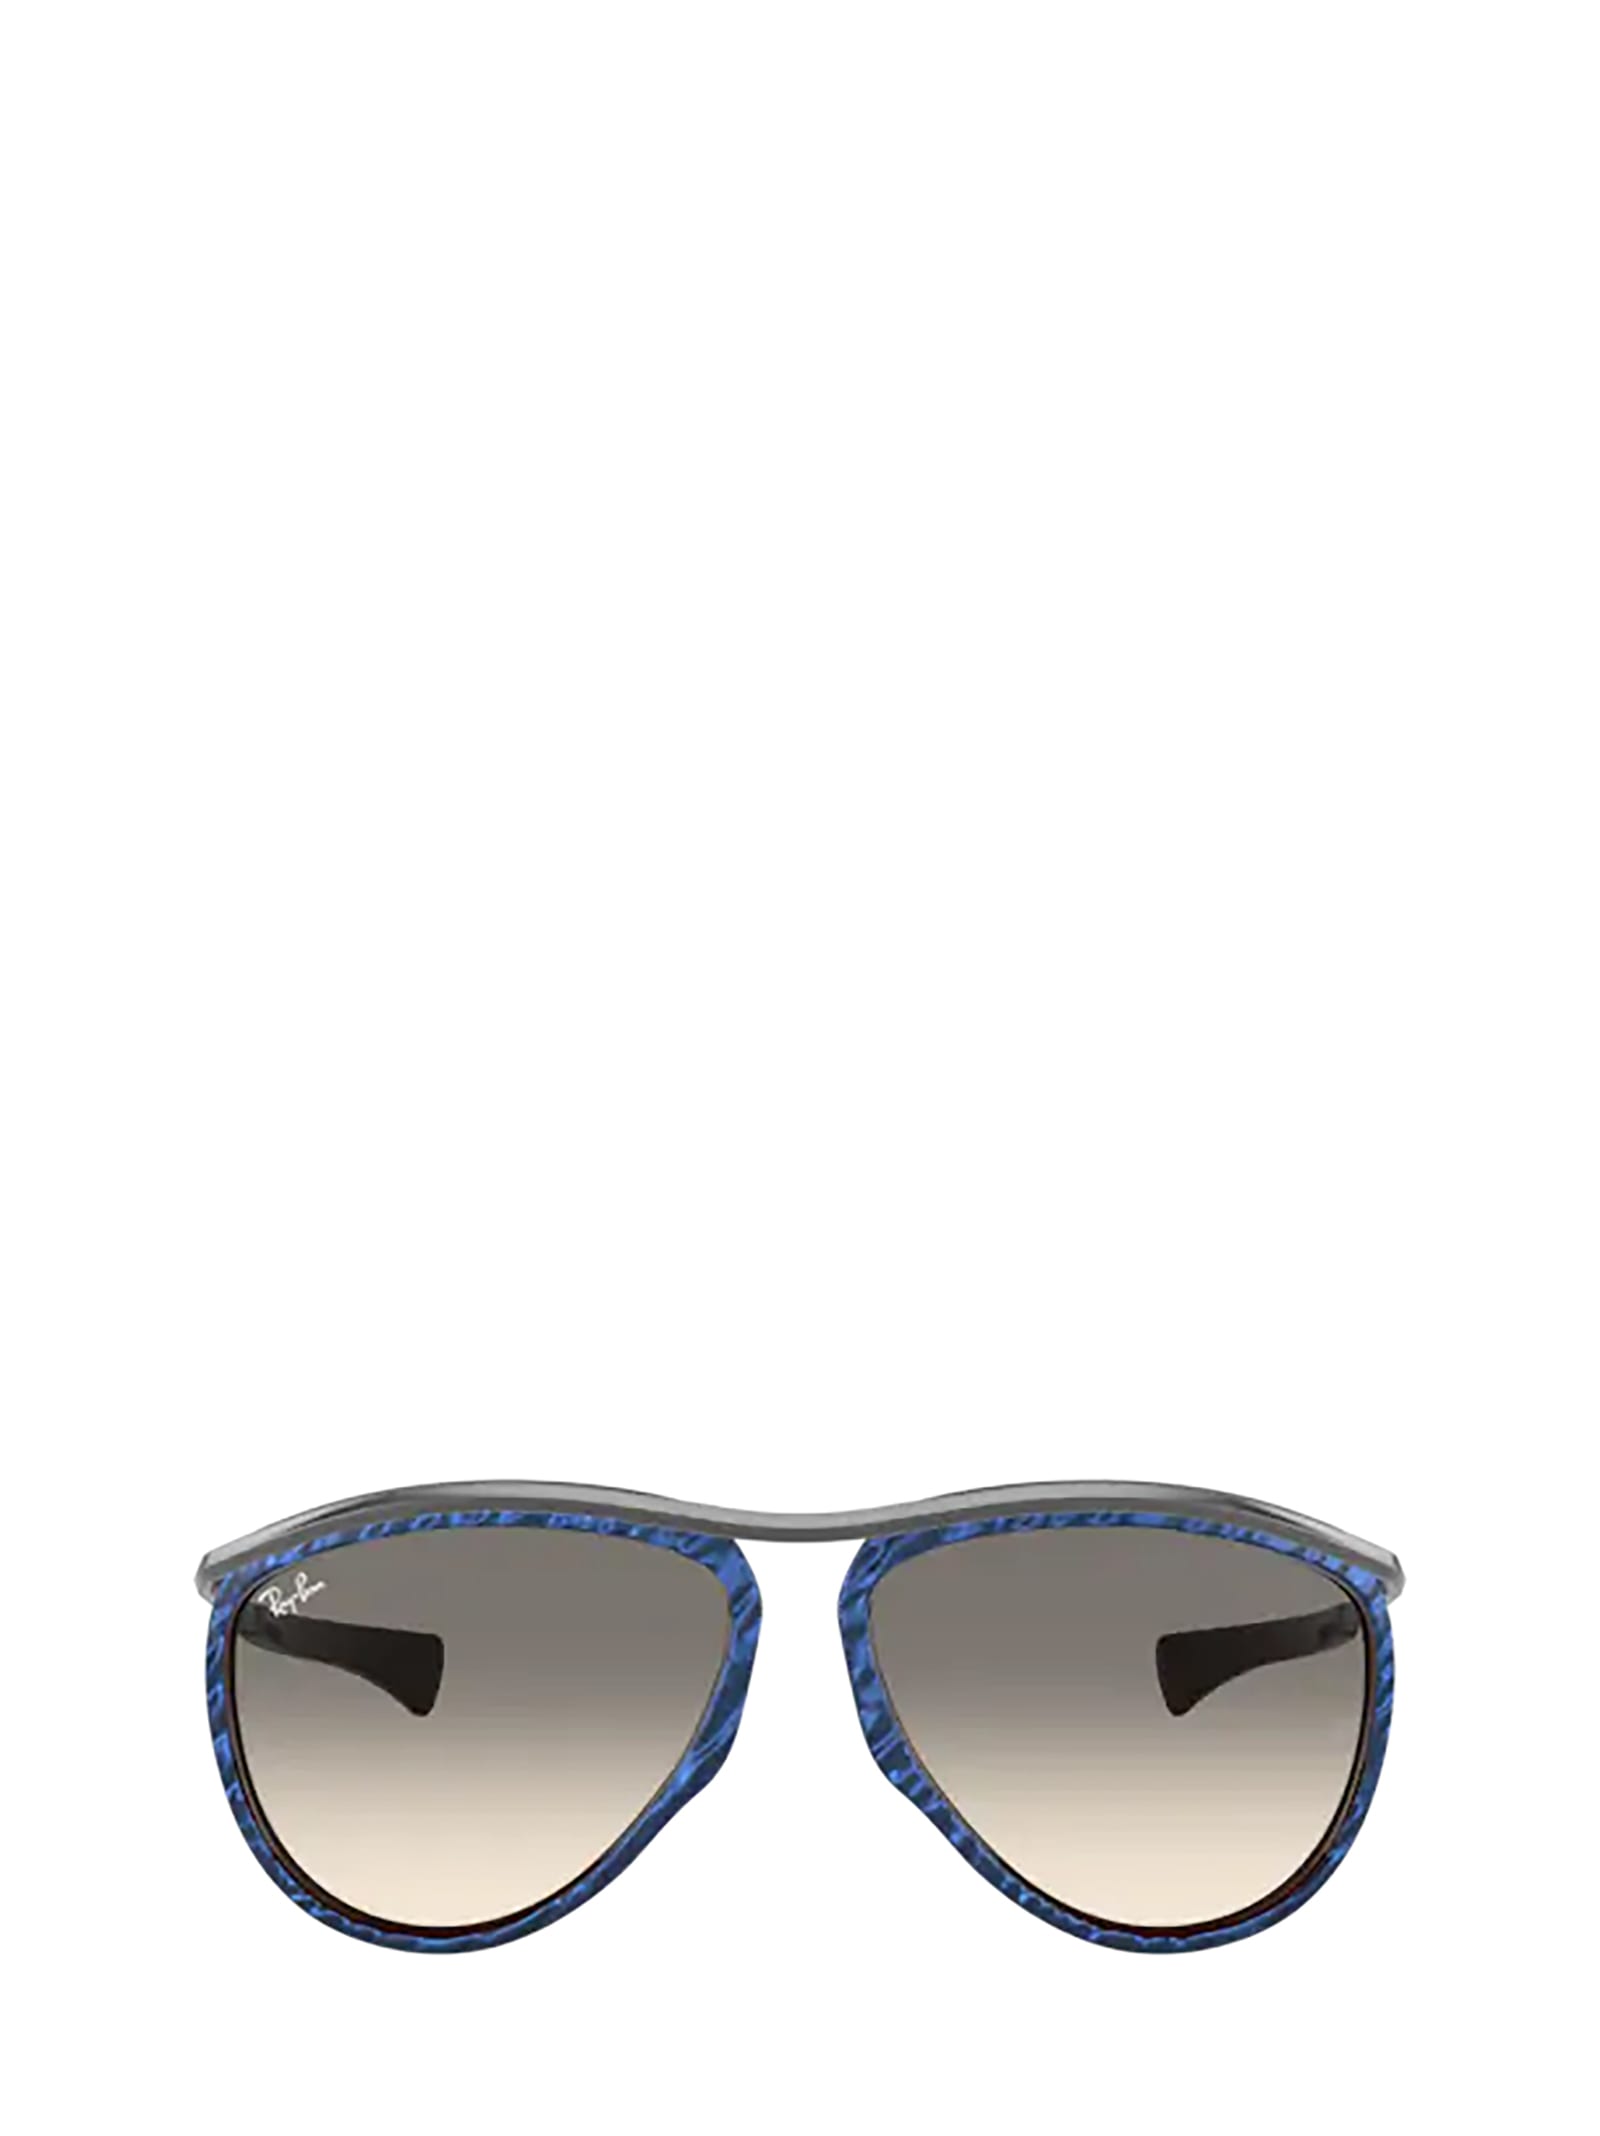 Ray-Ban Ray-ban Rb2219 Wrinkled Blue On Brown Sunglasses